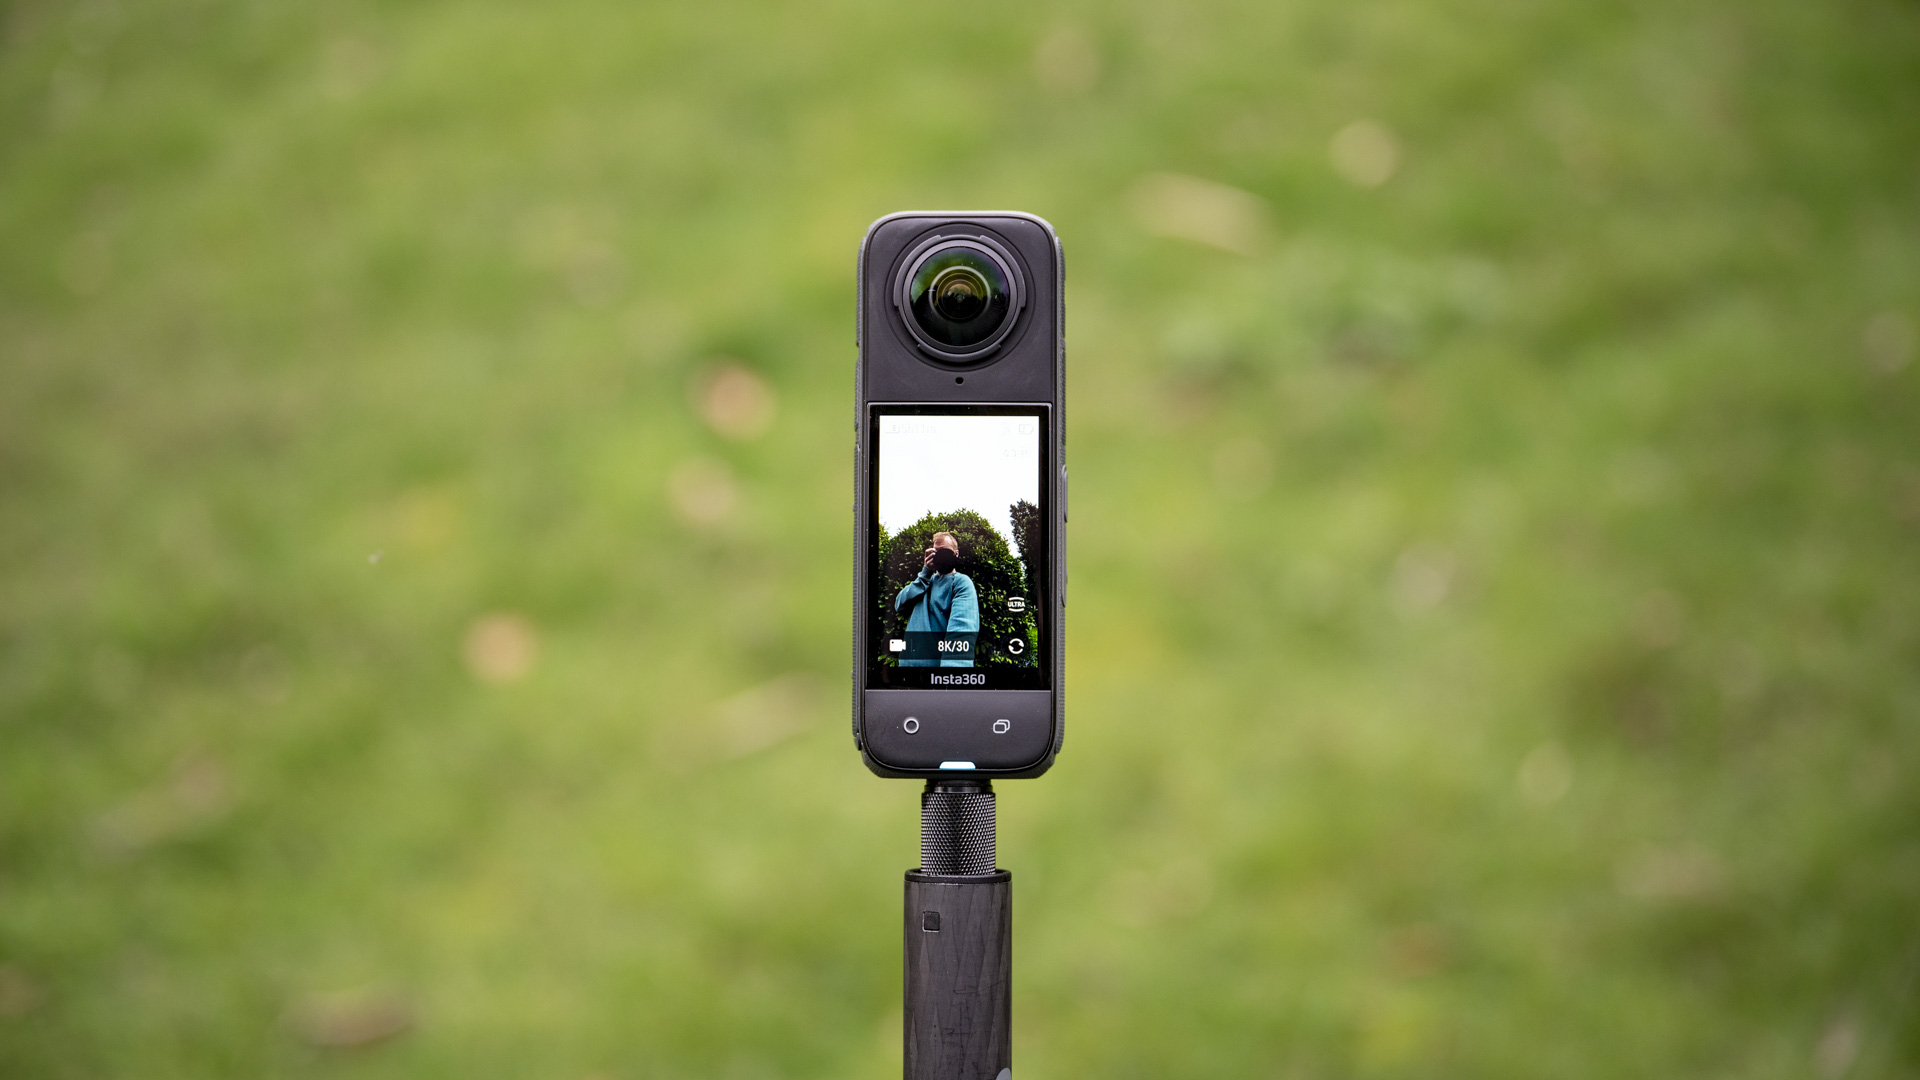 Insta360 X4 360 degree camera outdoors with vibrant grassy background, recording video